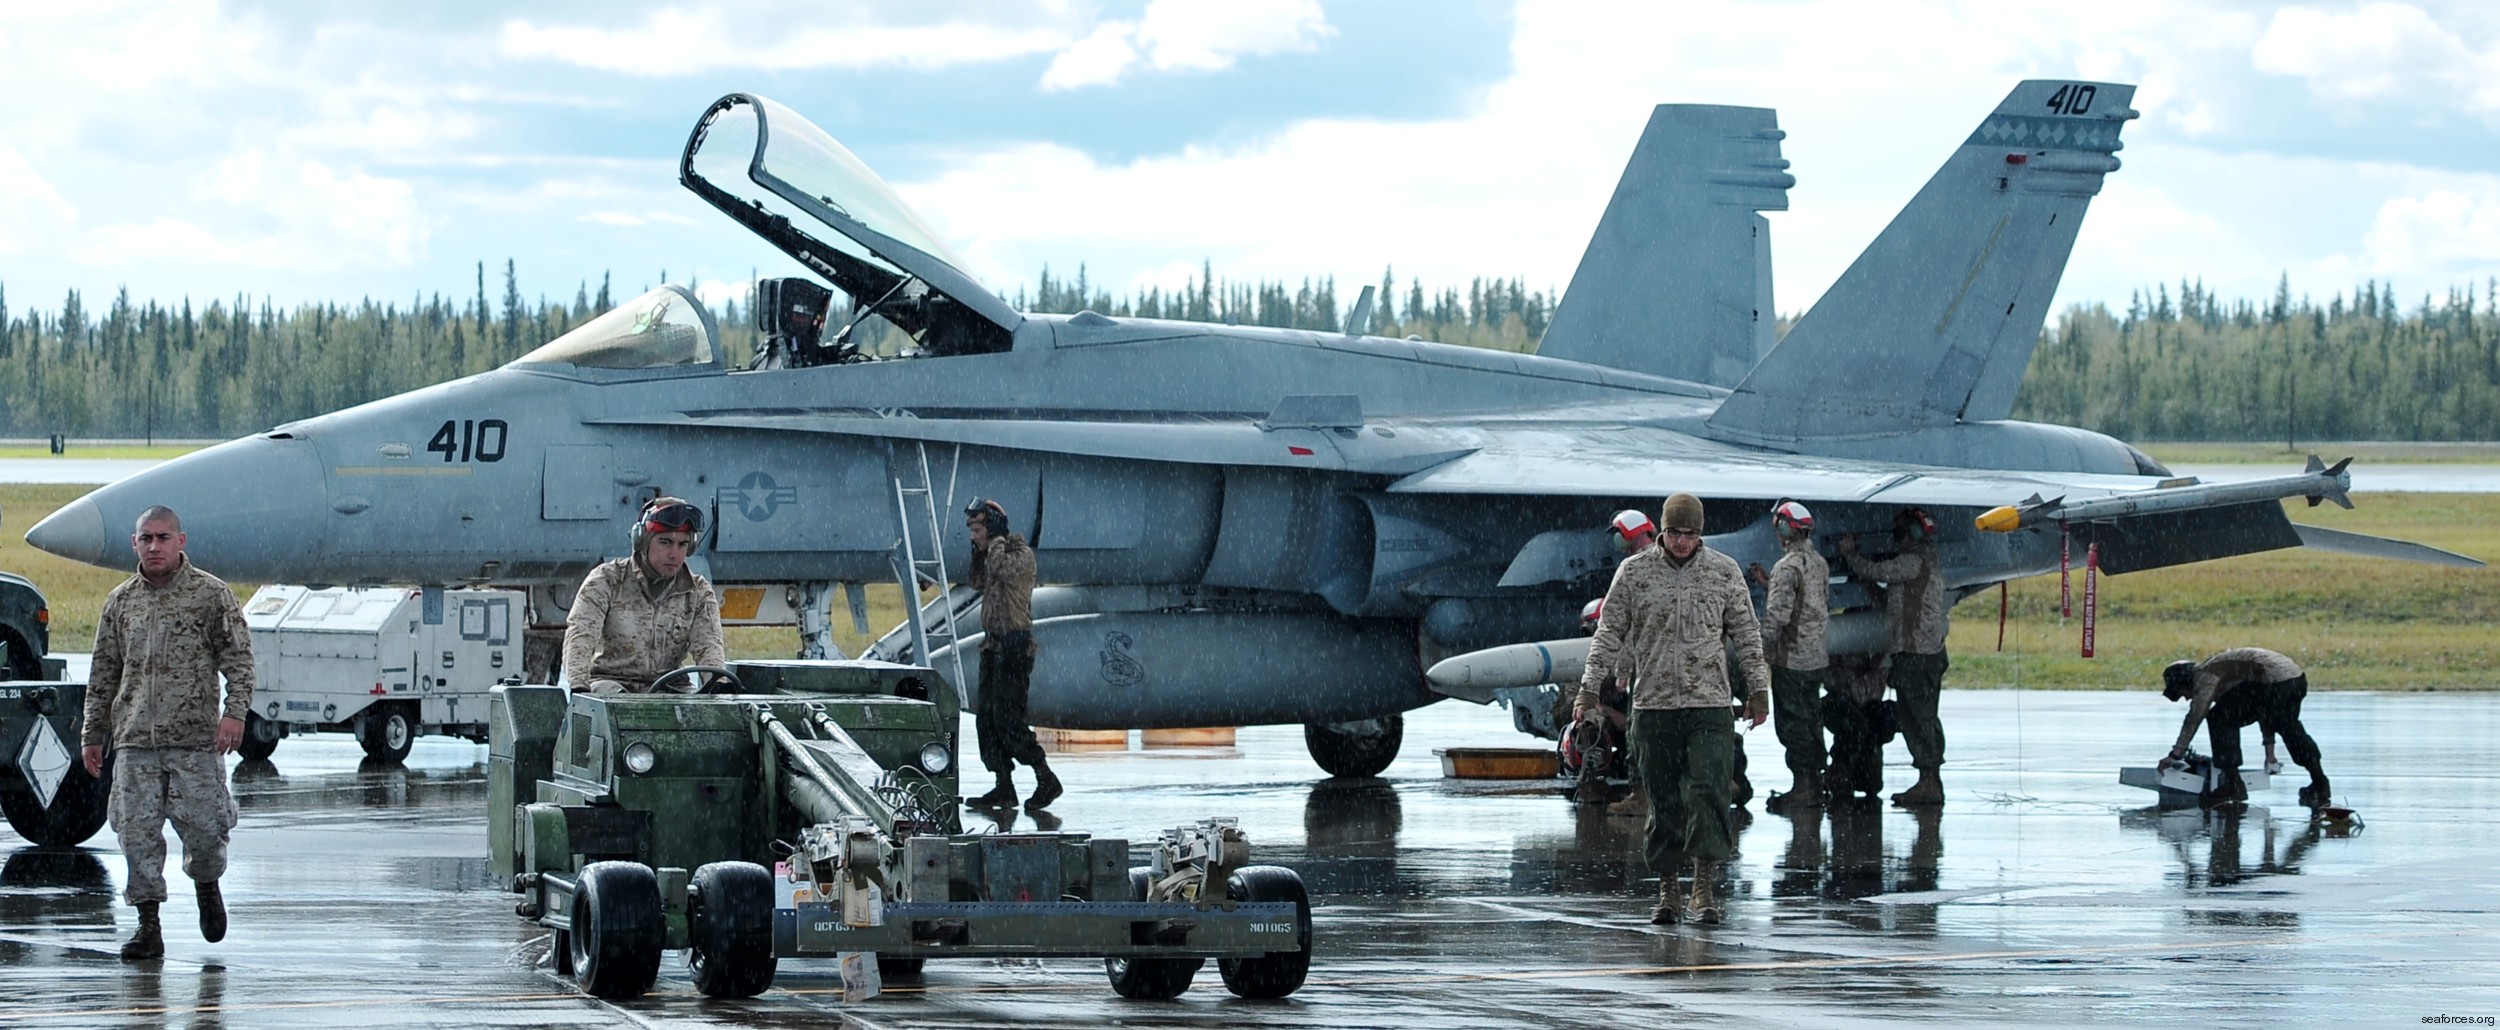 vmfa-323 death rattlers marine fighter attack squadron f/a-18c hornet 158 exercise red flag eielson afb alaska